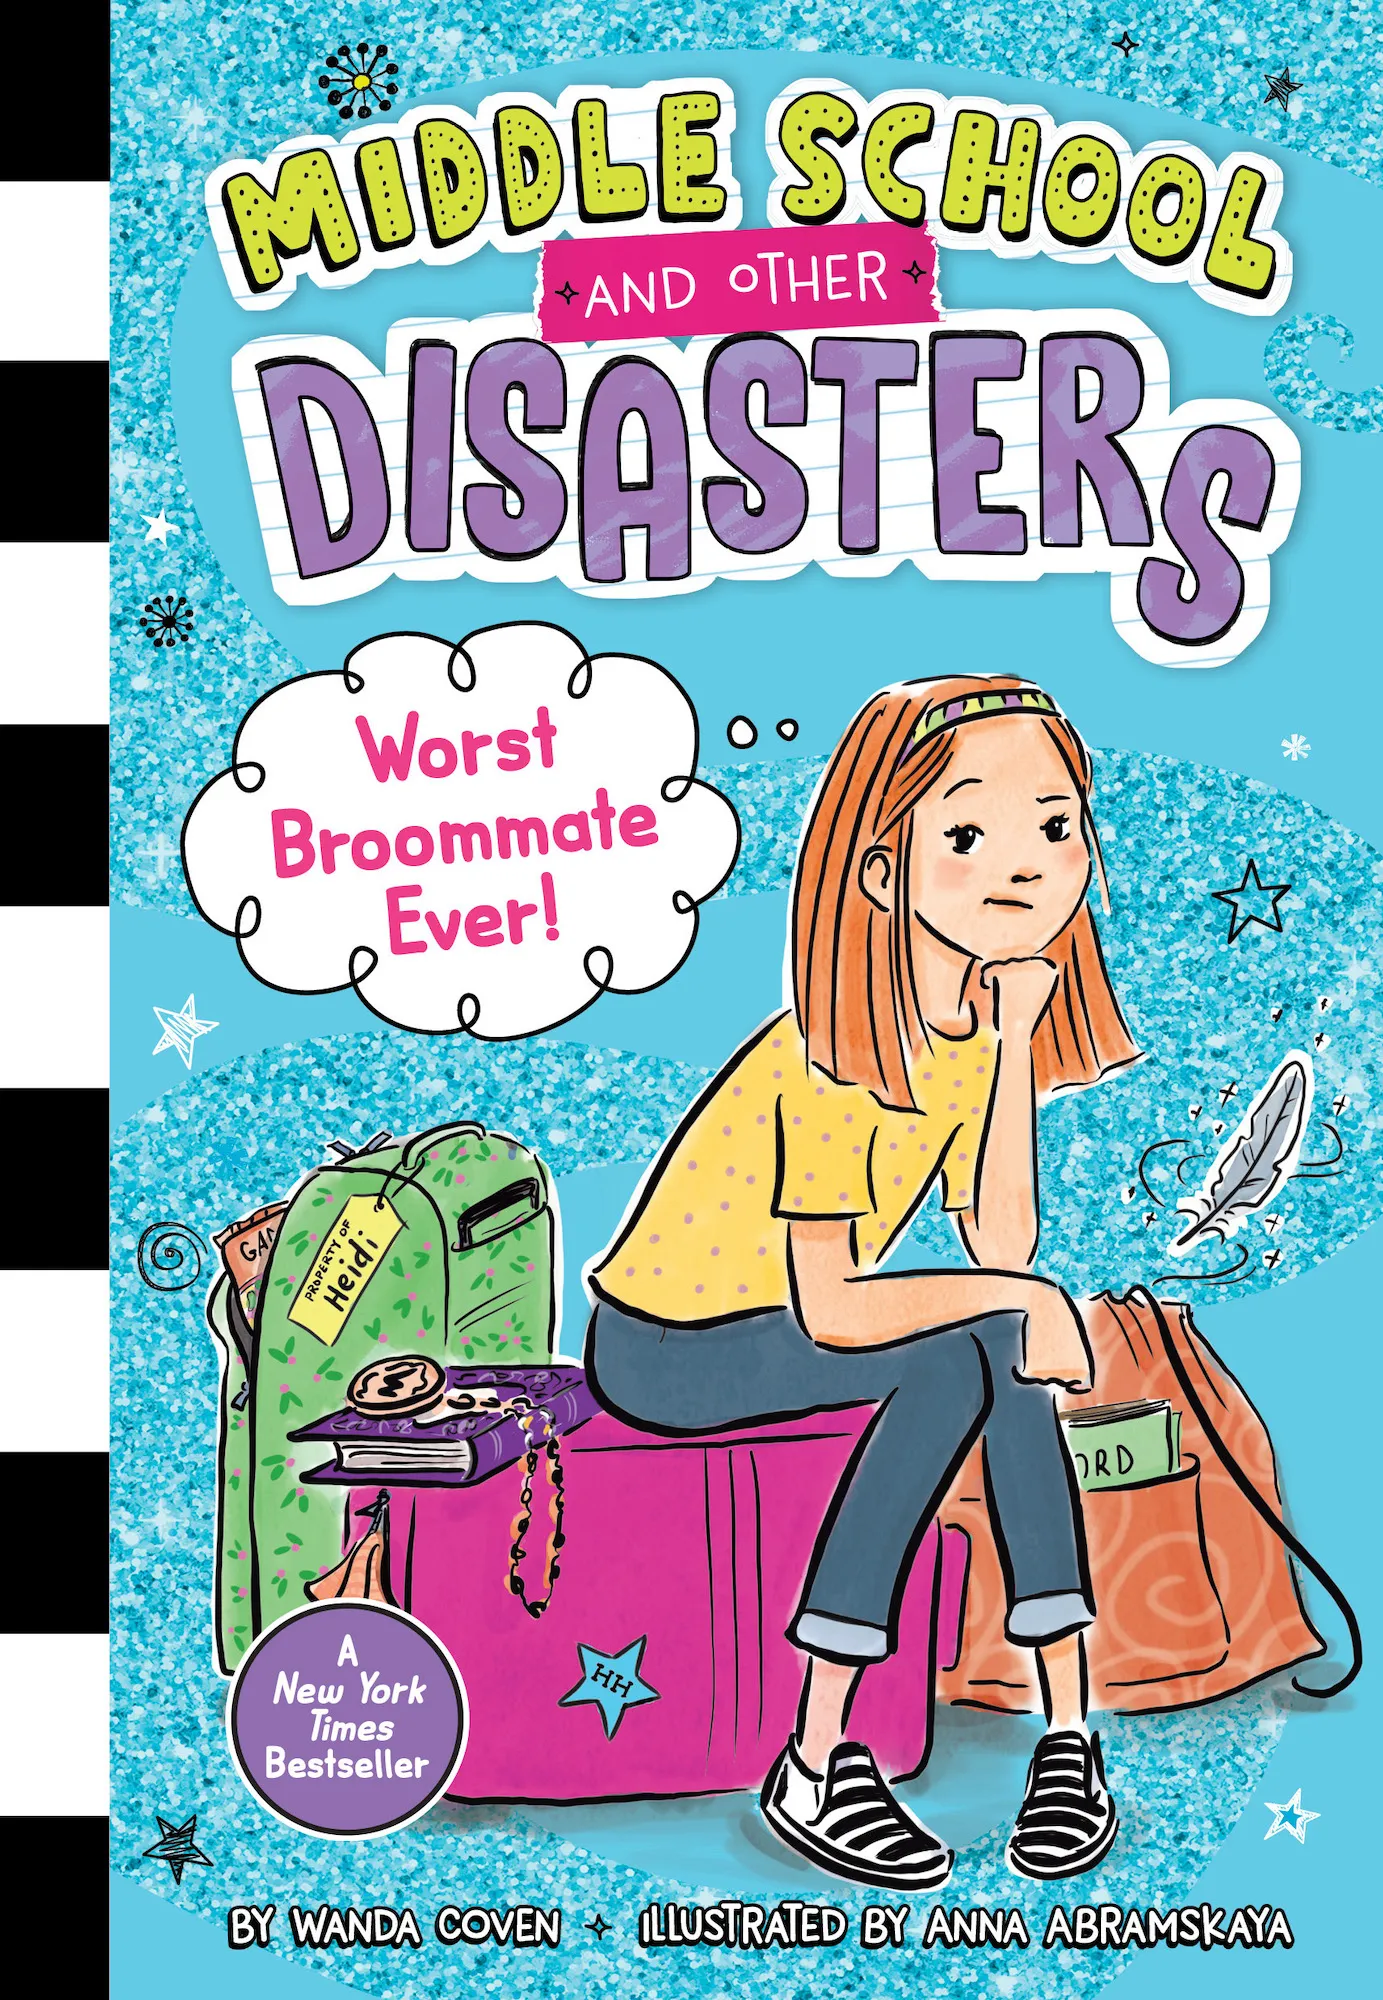 Worst Broommate Ever! (Middle School and Other Disasters #1)